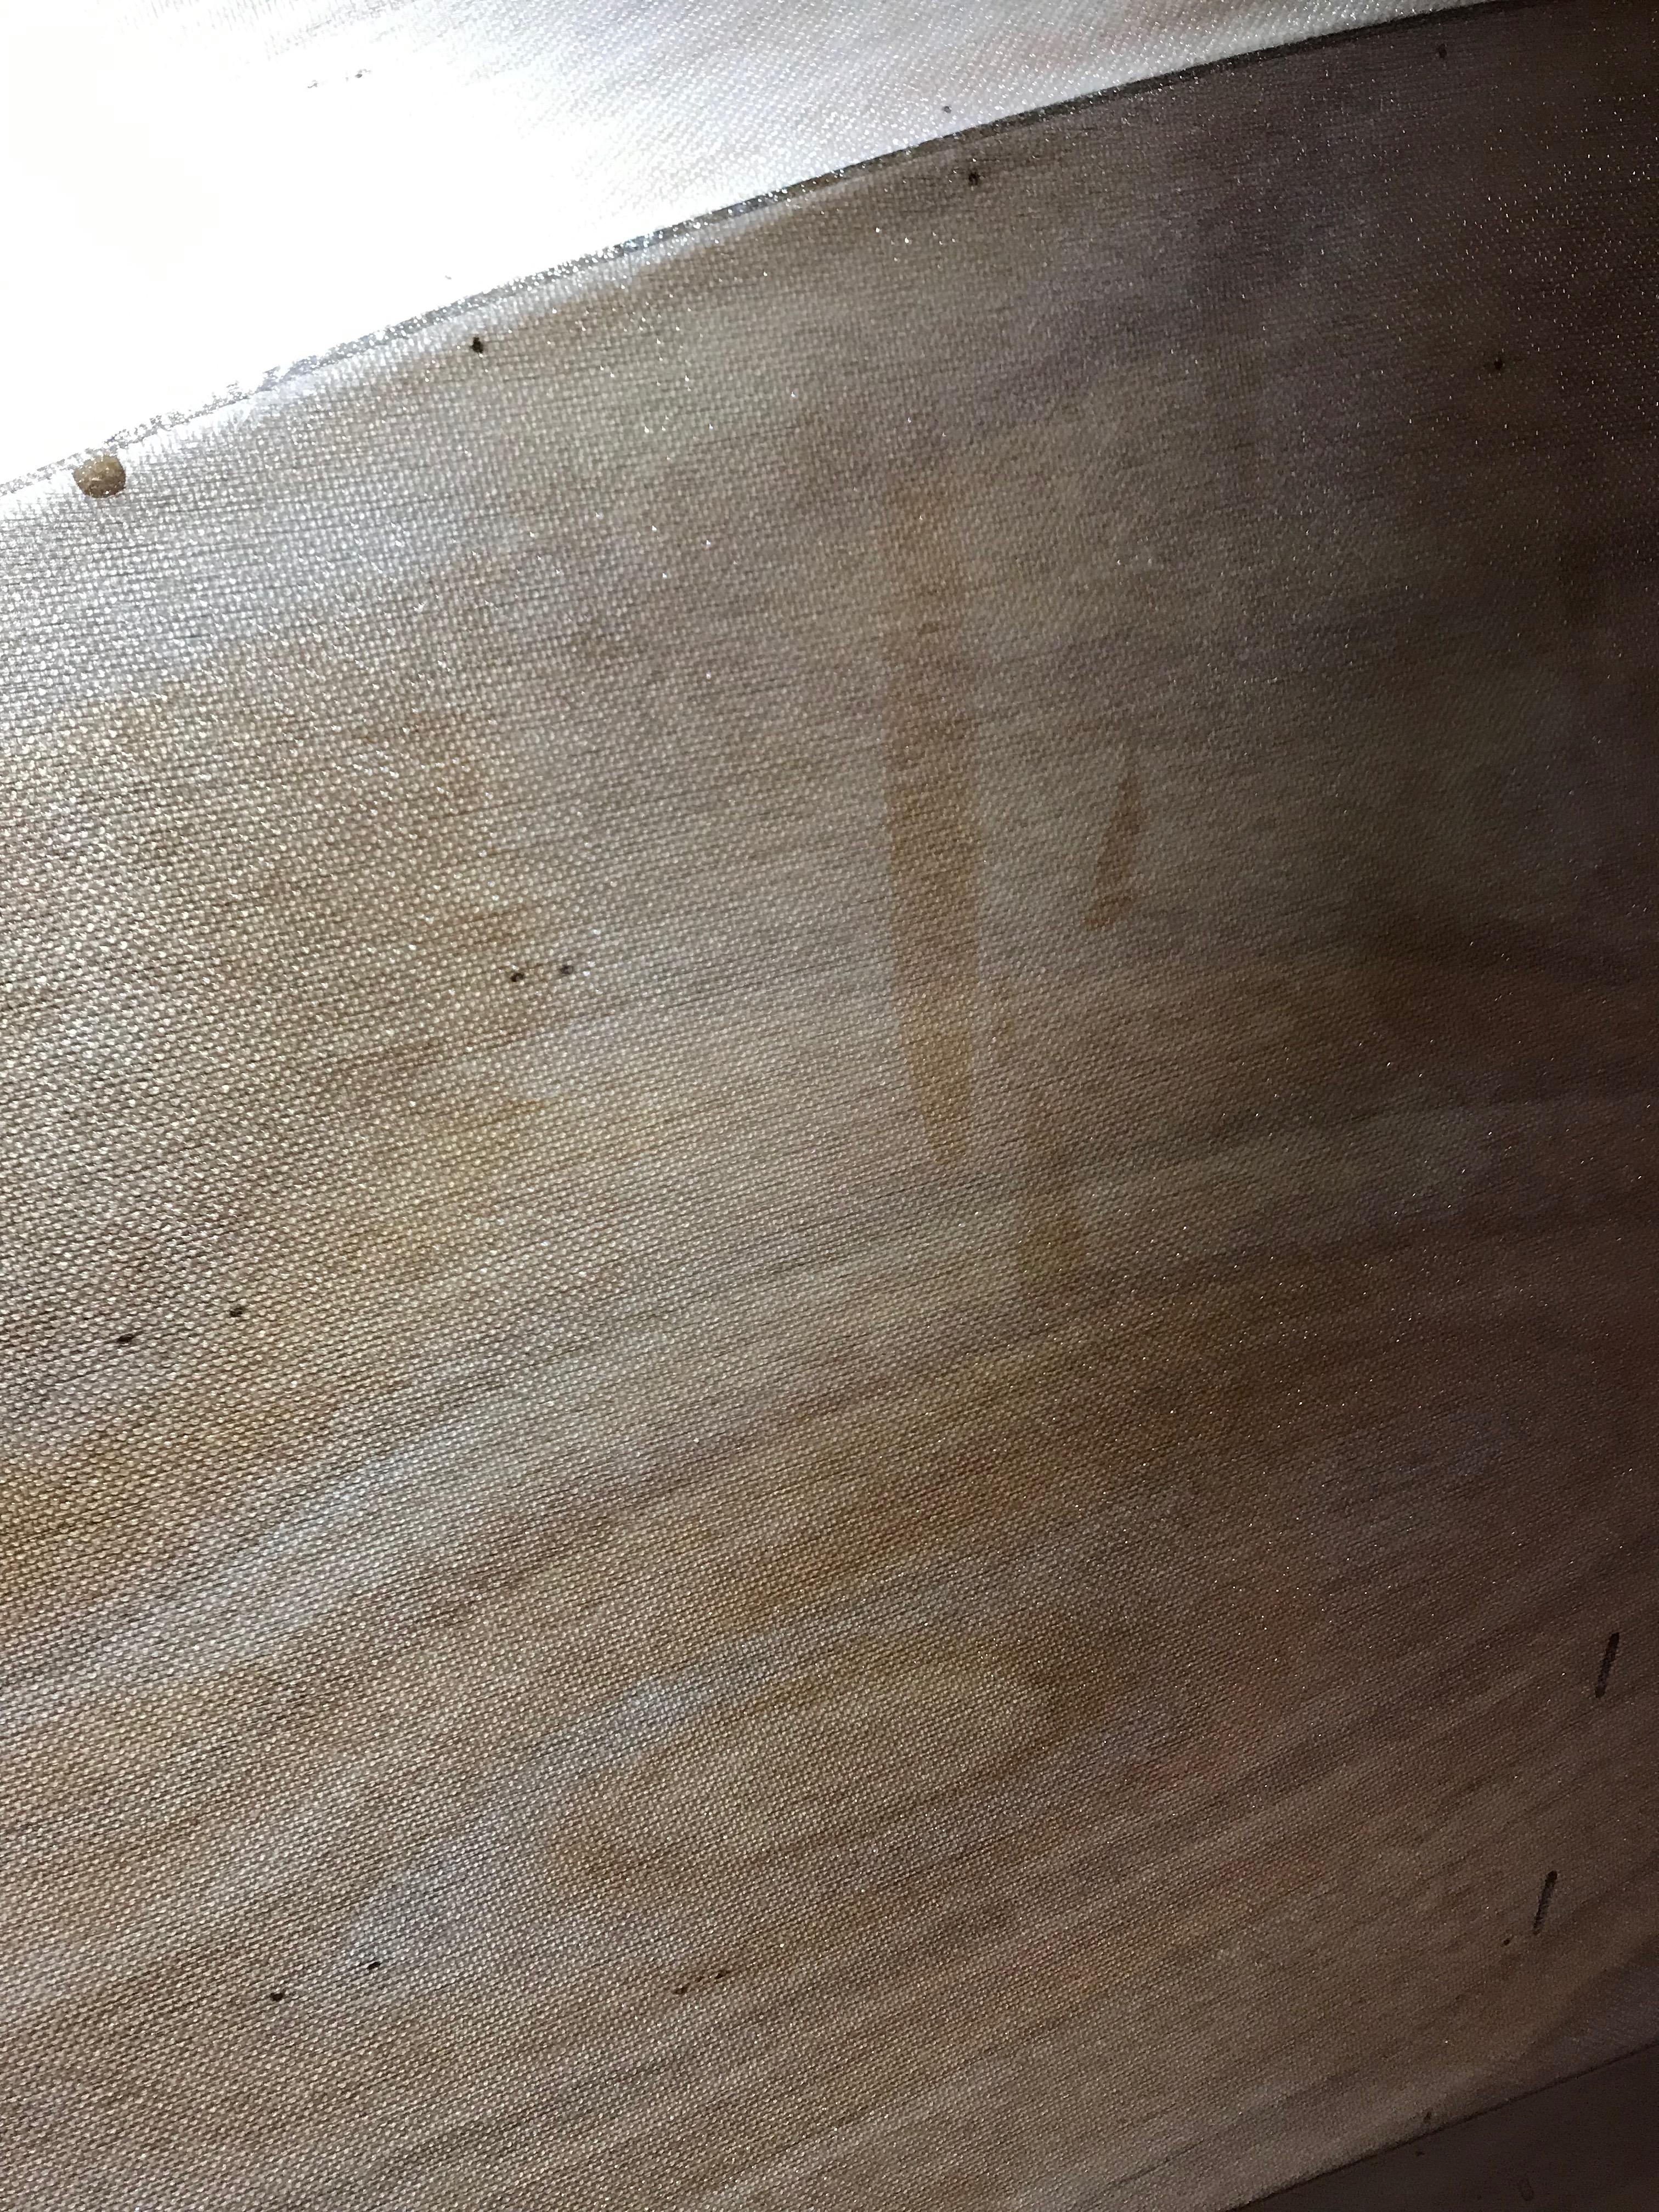 wood stained by epoxy